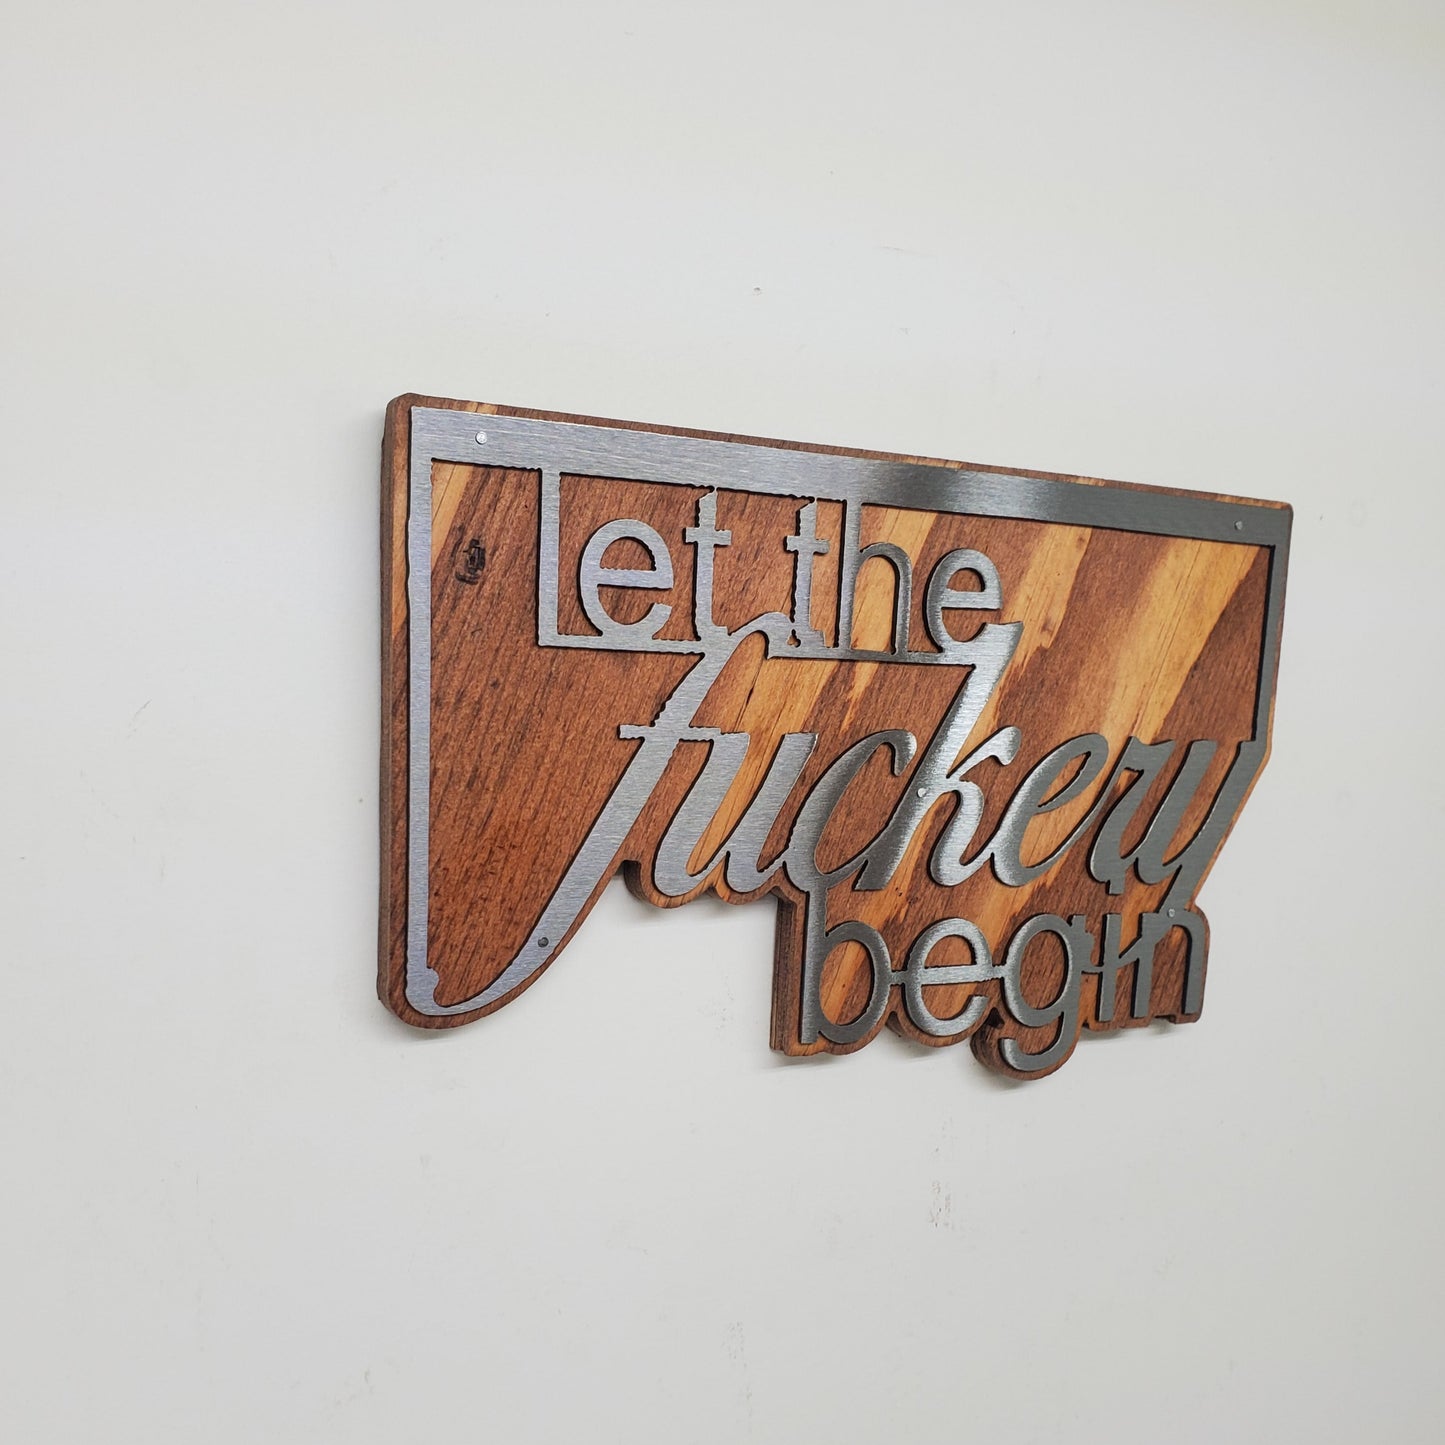 Decorative Word Cut Out on Stained Wood Background, A Unique and Stylish wall decor piece, made of steel cutout of the word Shenanigans on a stained wood background, it comes with saw tooth style hanger for easy mounting